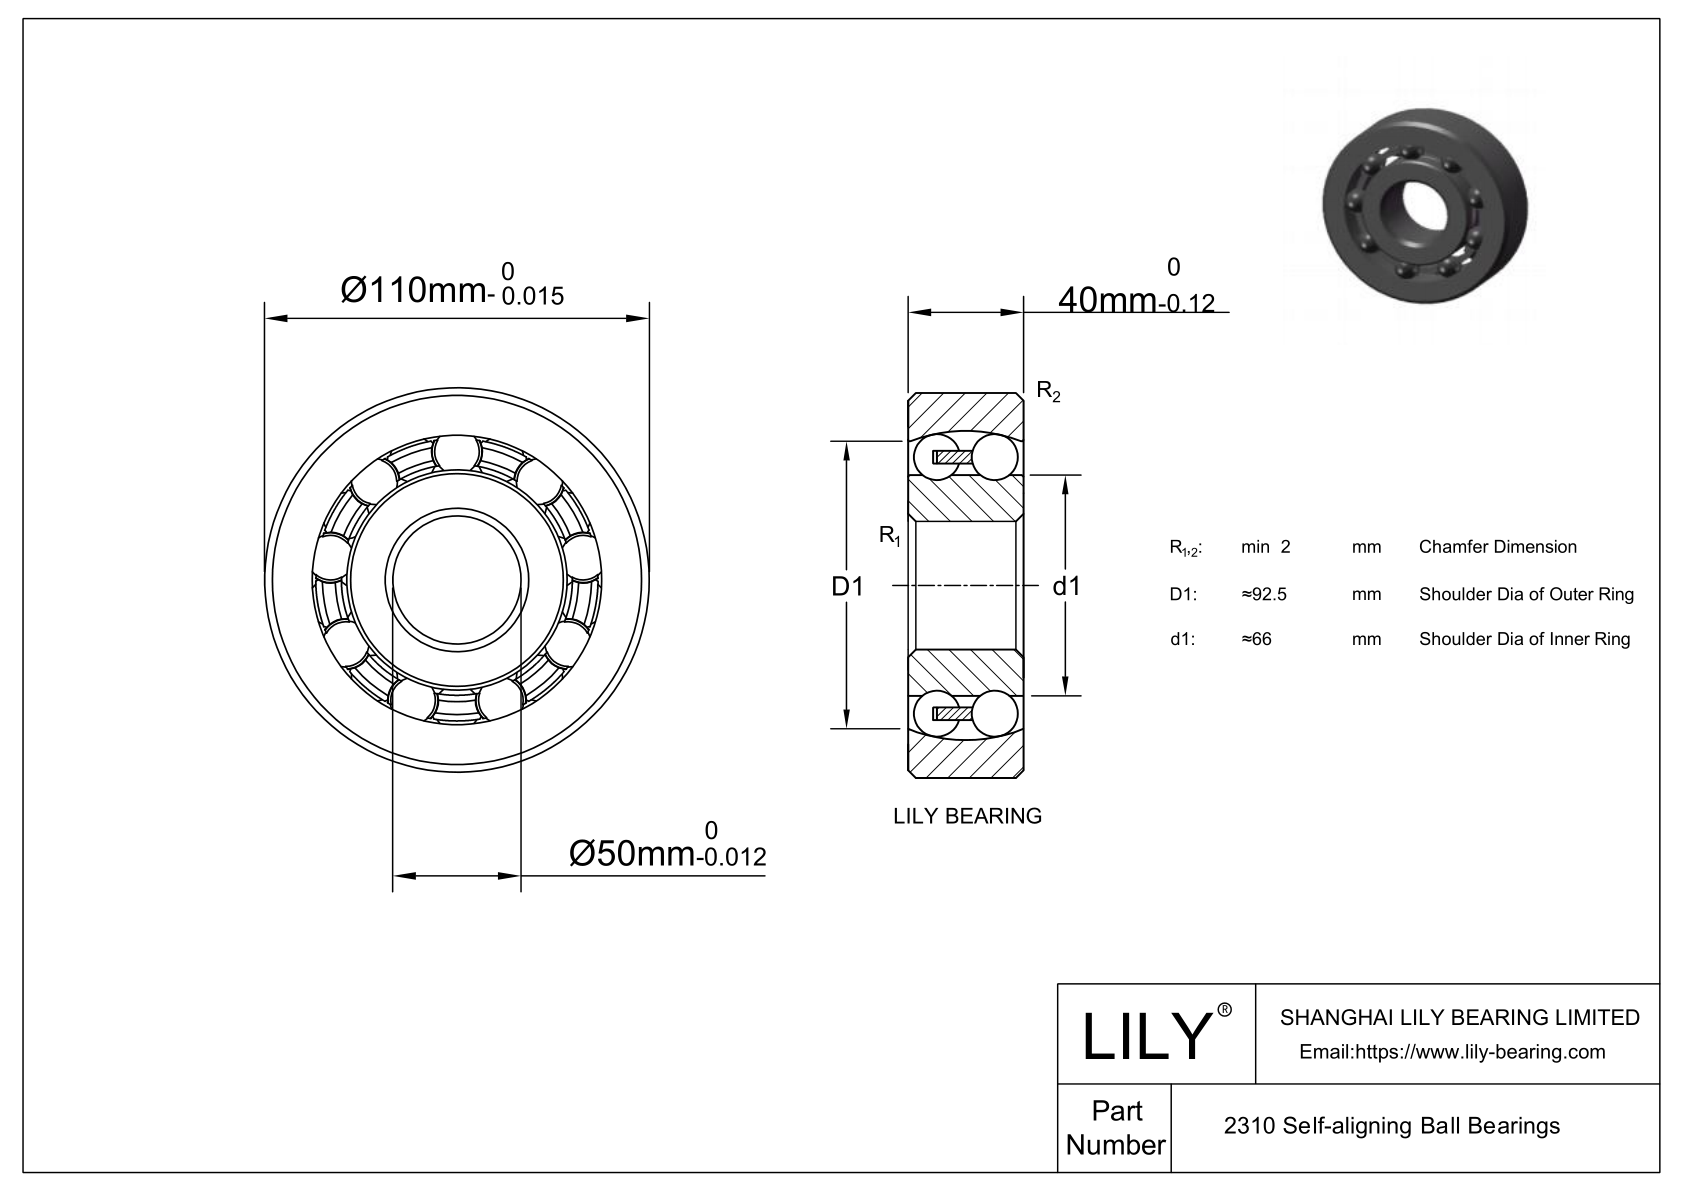 S2310 Stainless Steel Self Aligning Ball Bearings cad drawing